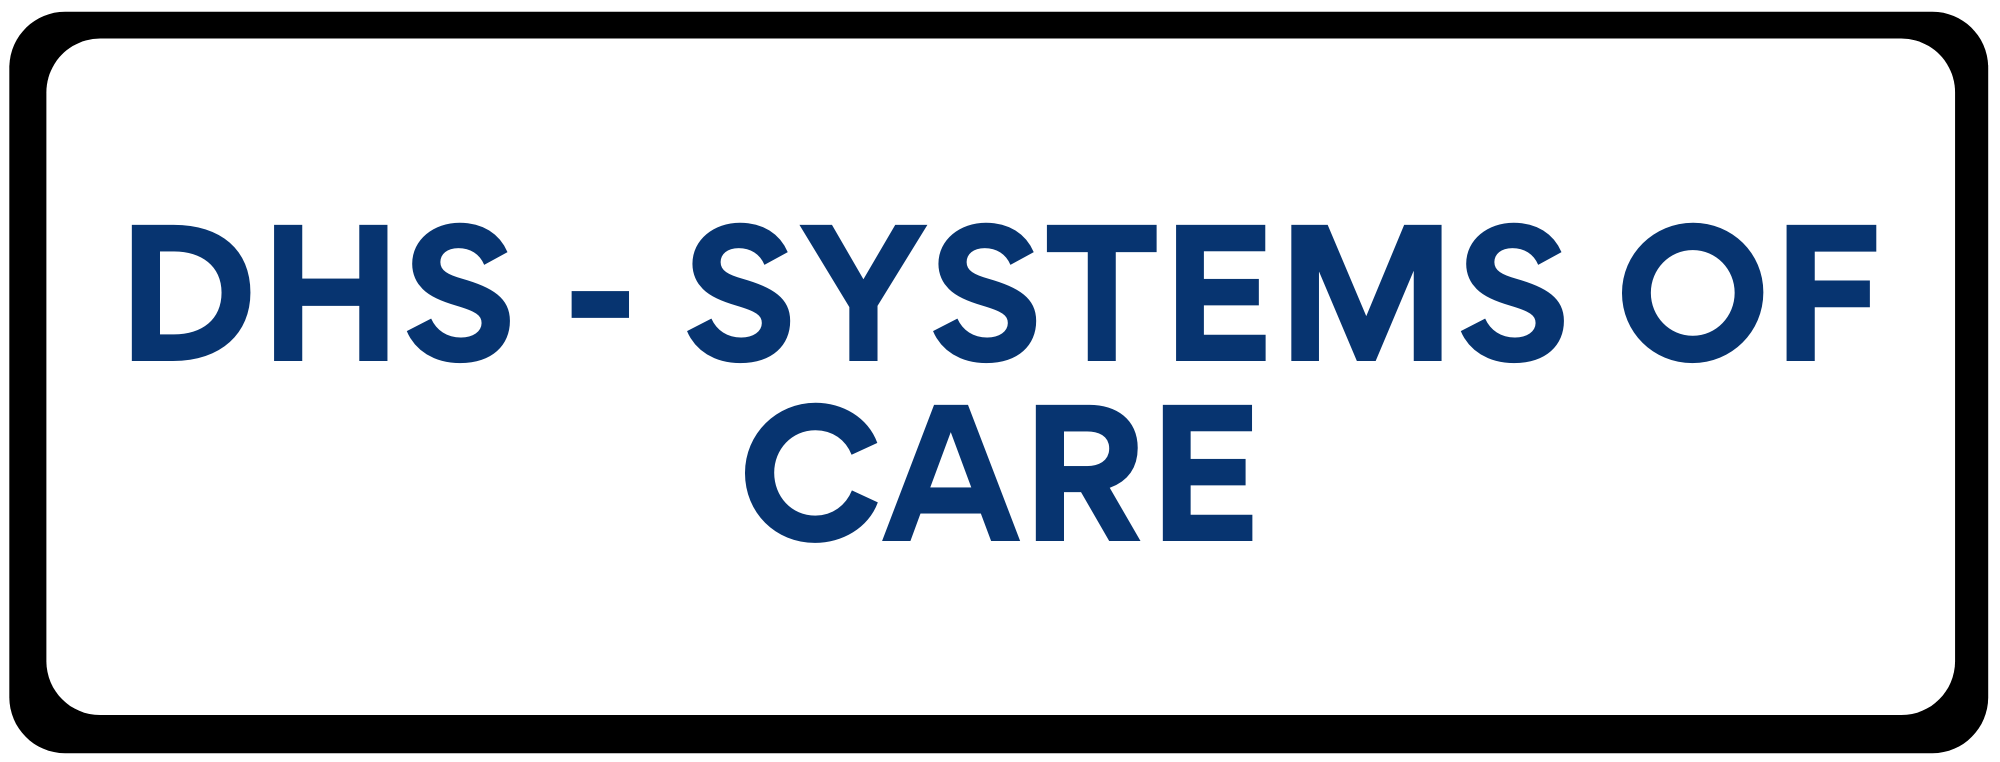 DHS Systems of Care